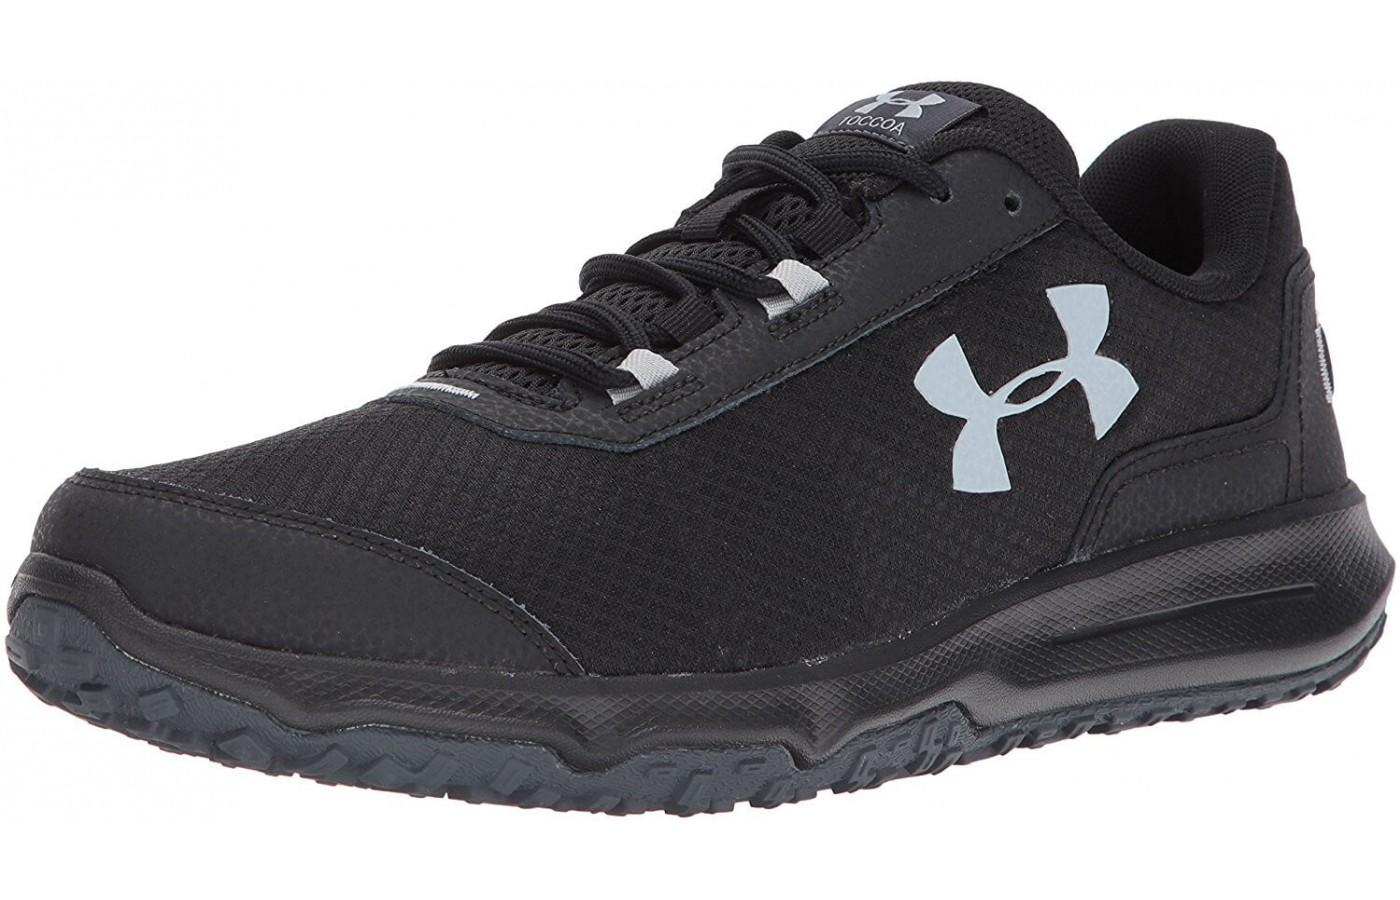 The Under Armour Toccoa features a high build quality and terrific performance.